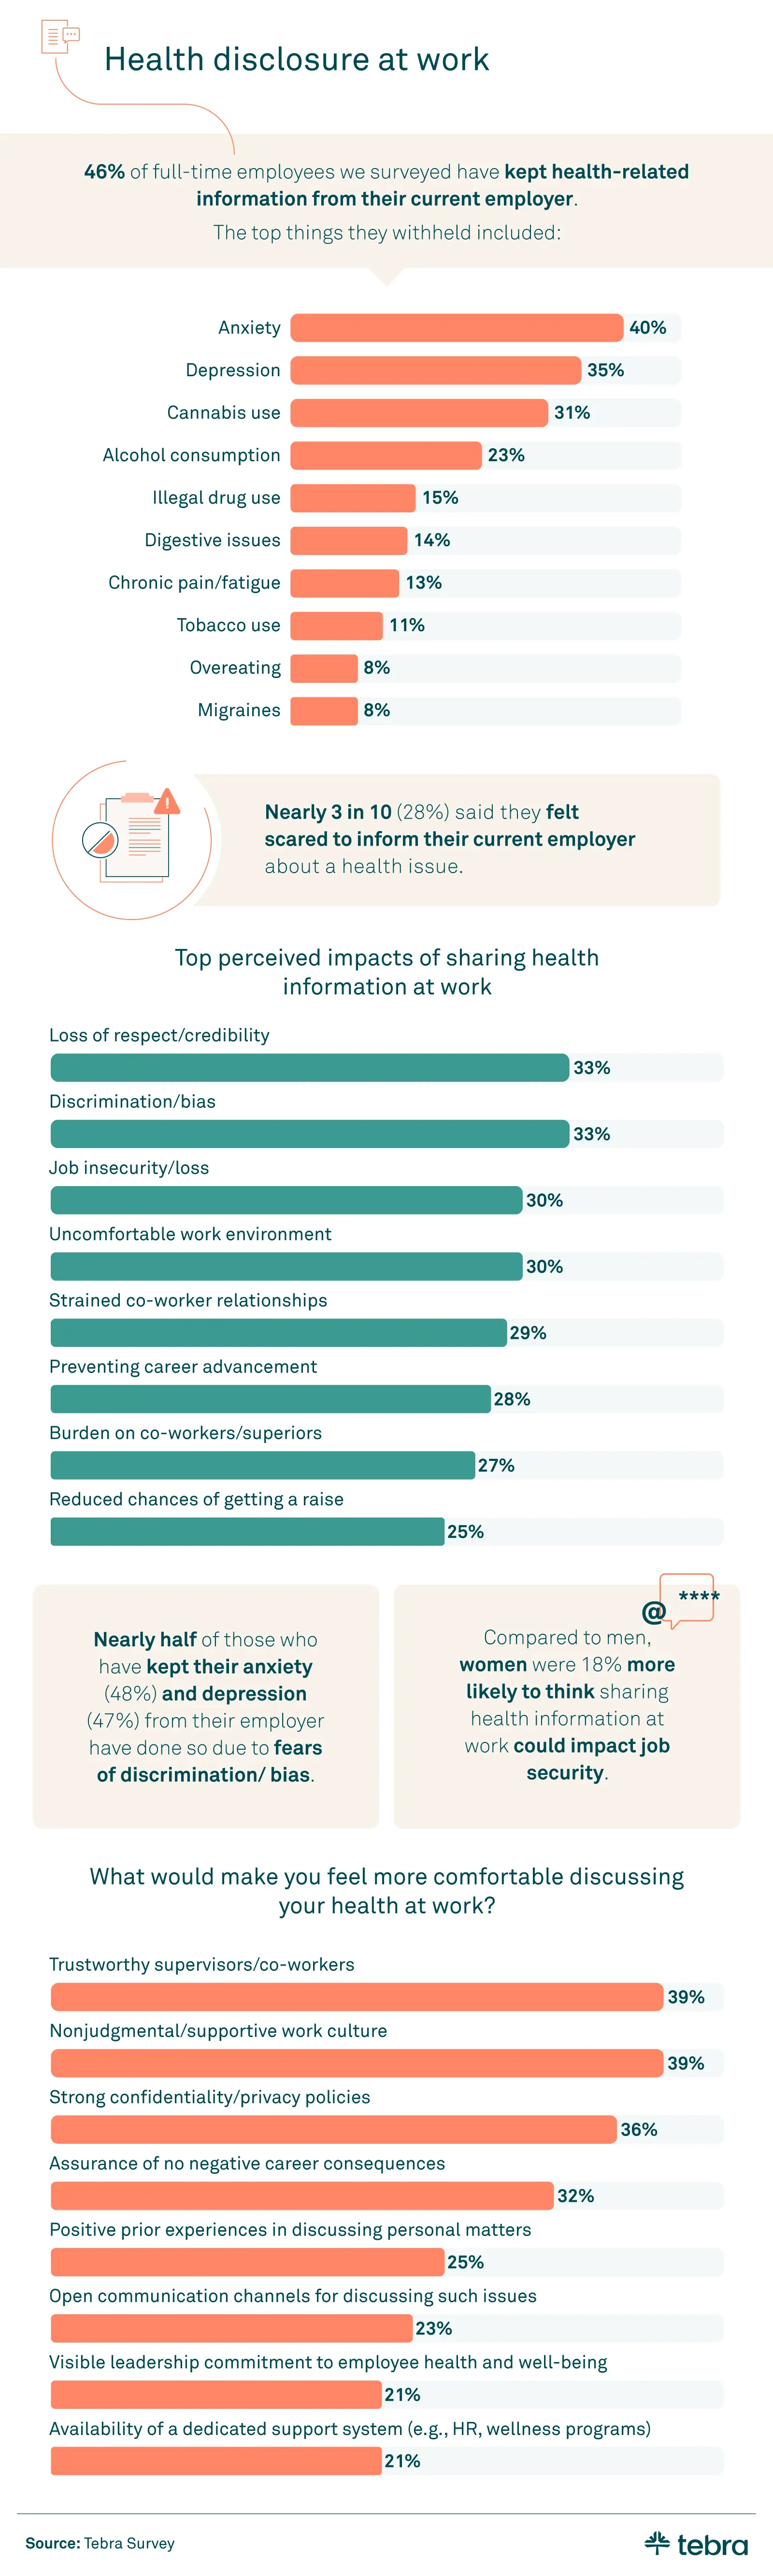 Infographic on health details often not shared with employers, related fears, and ways to improve disclosure comfort